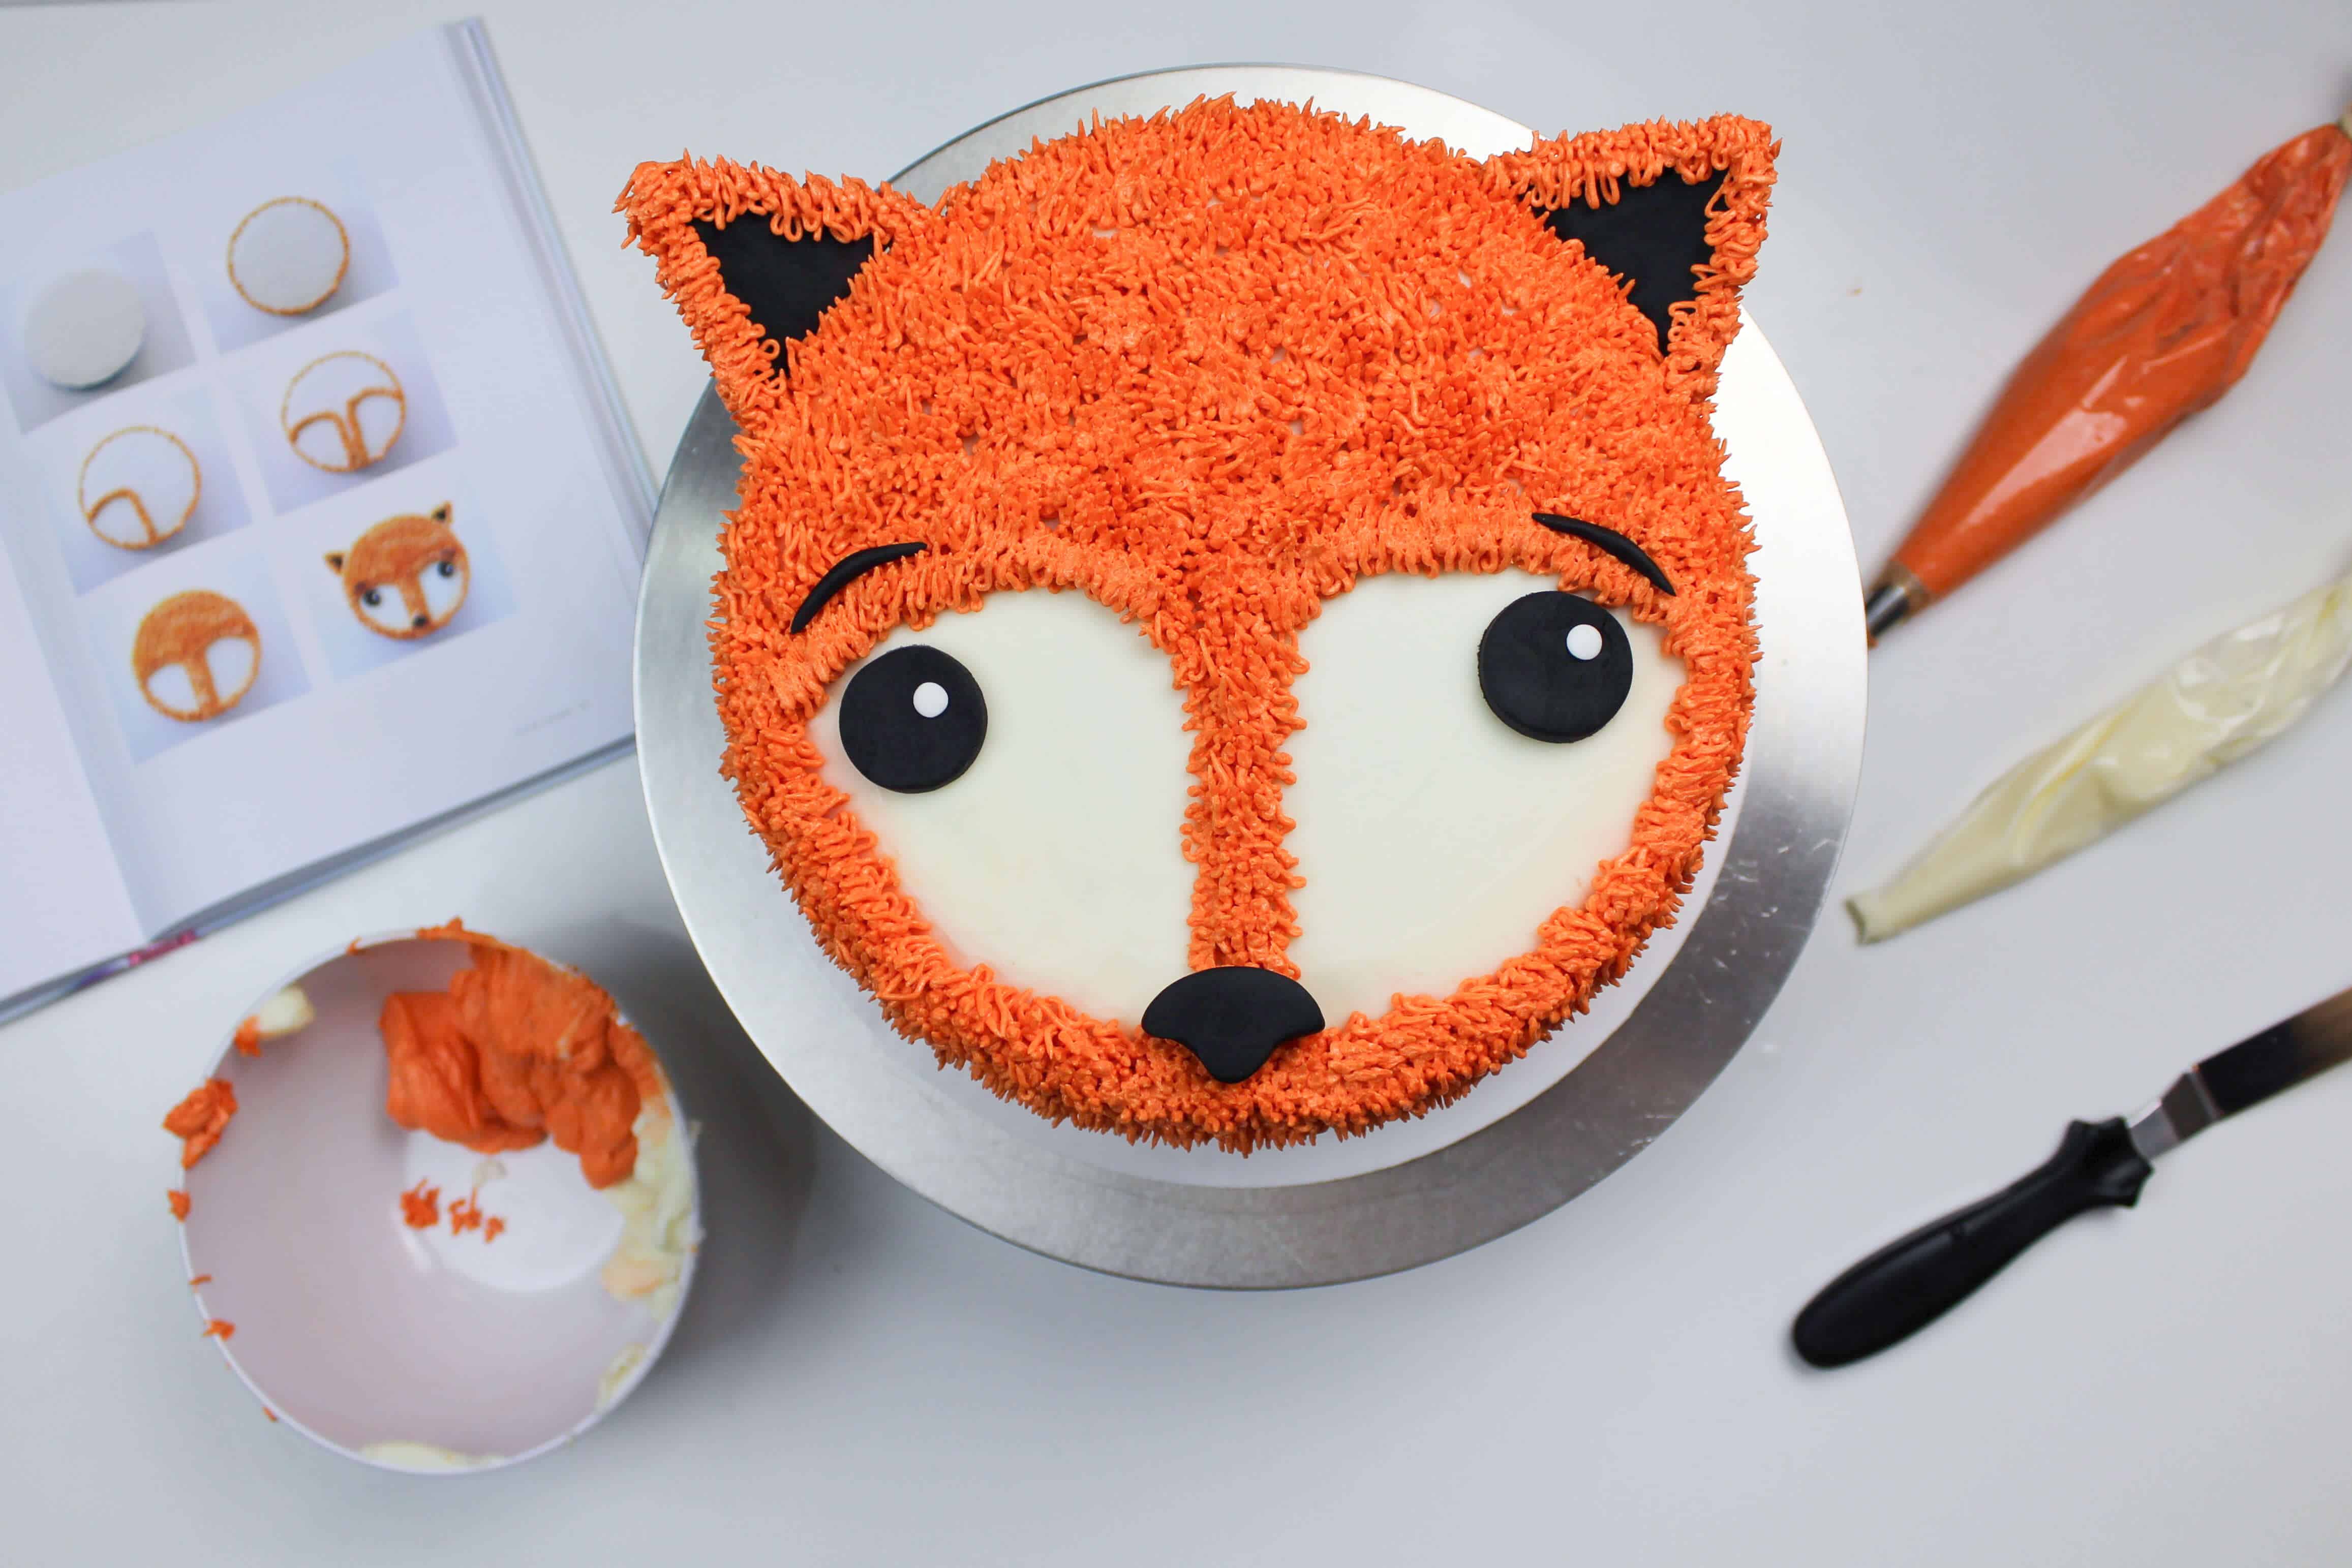 image of a cute fox cake decorated with buttercream